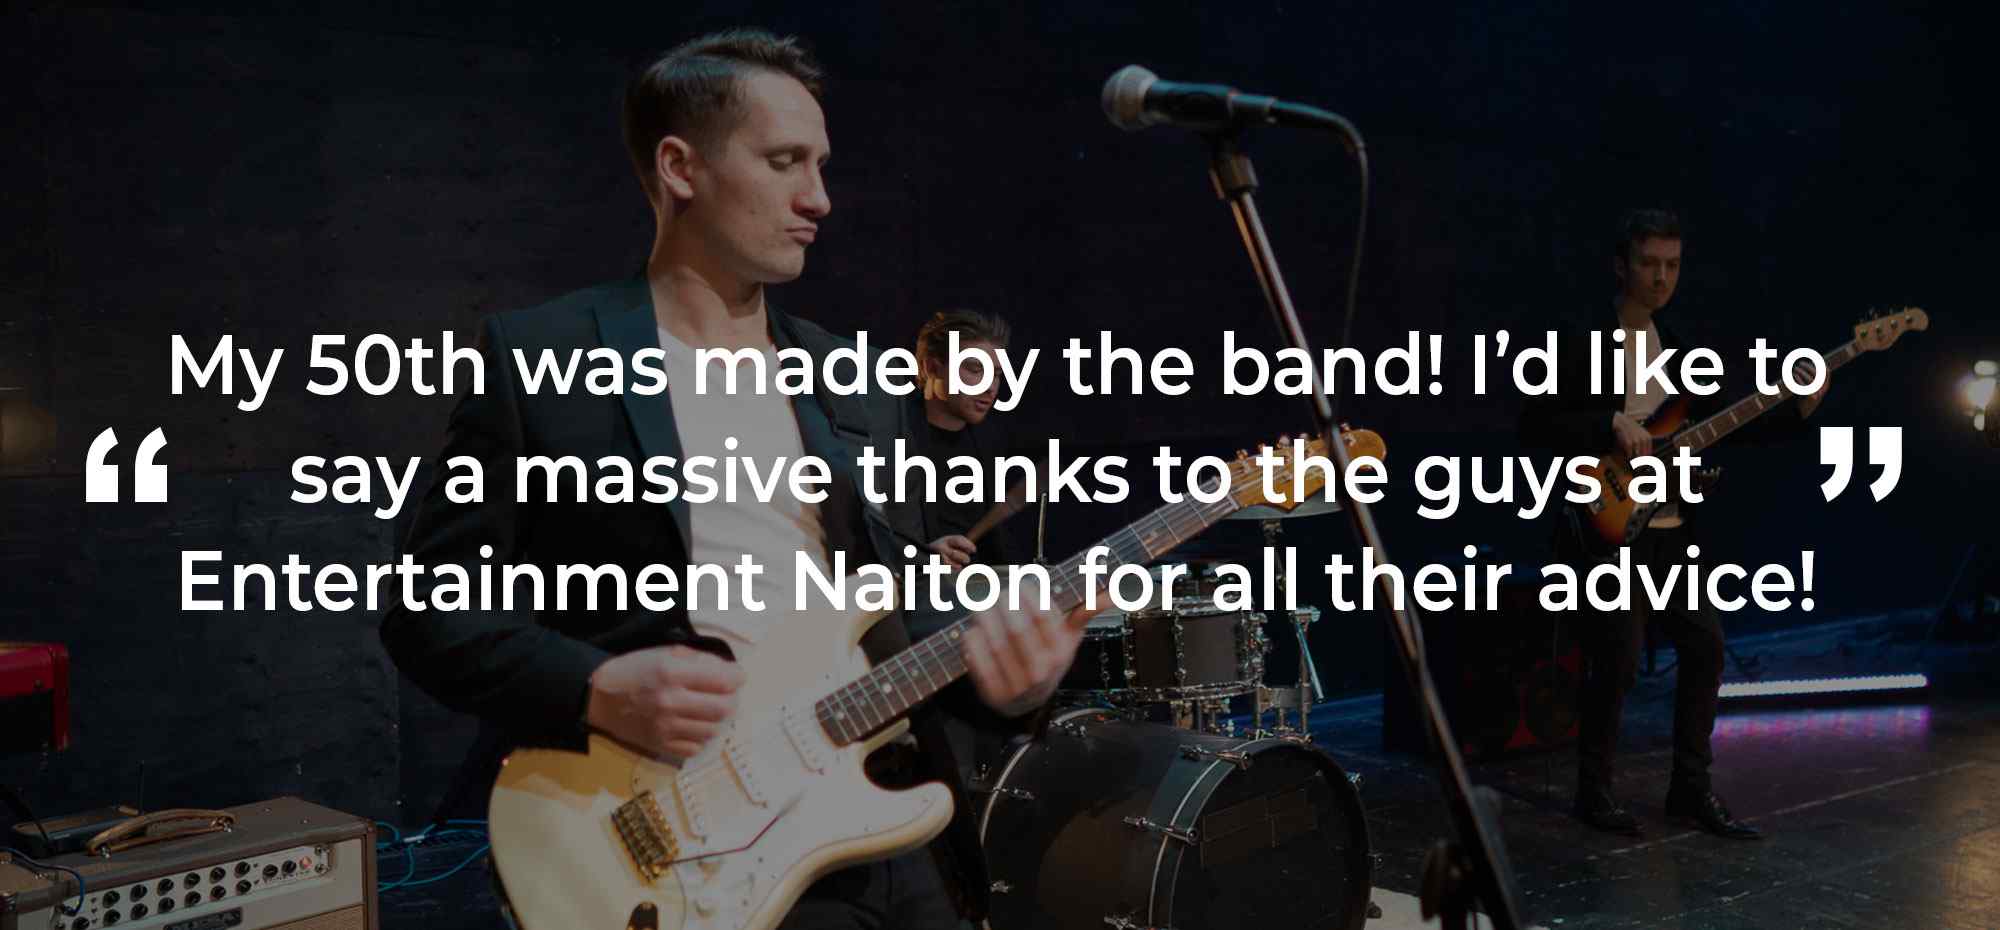 Client Review of a Party Band Europe